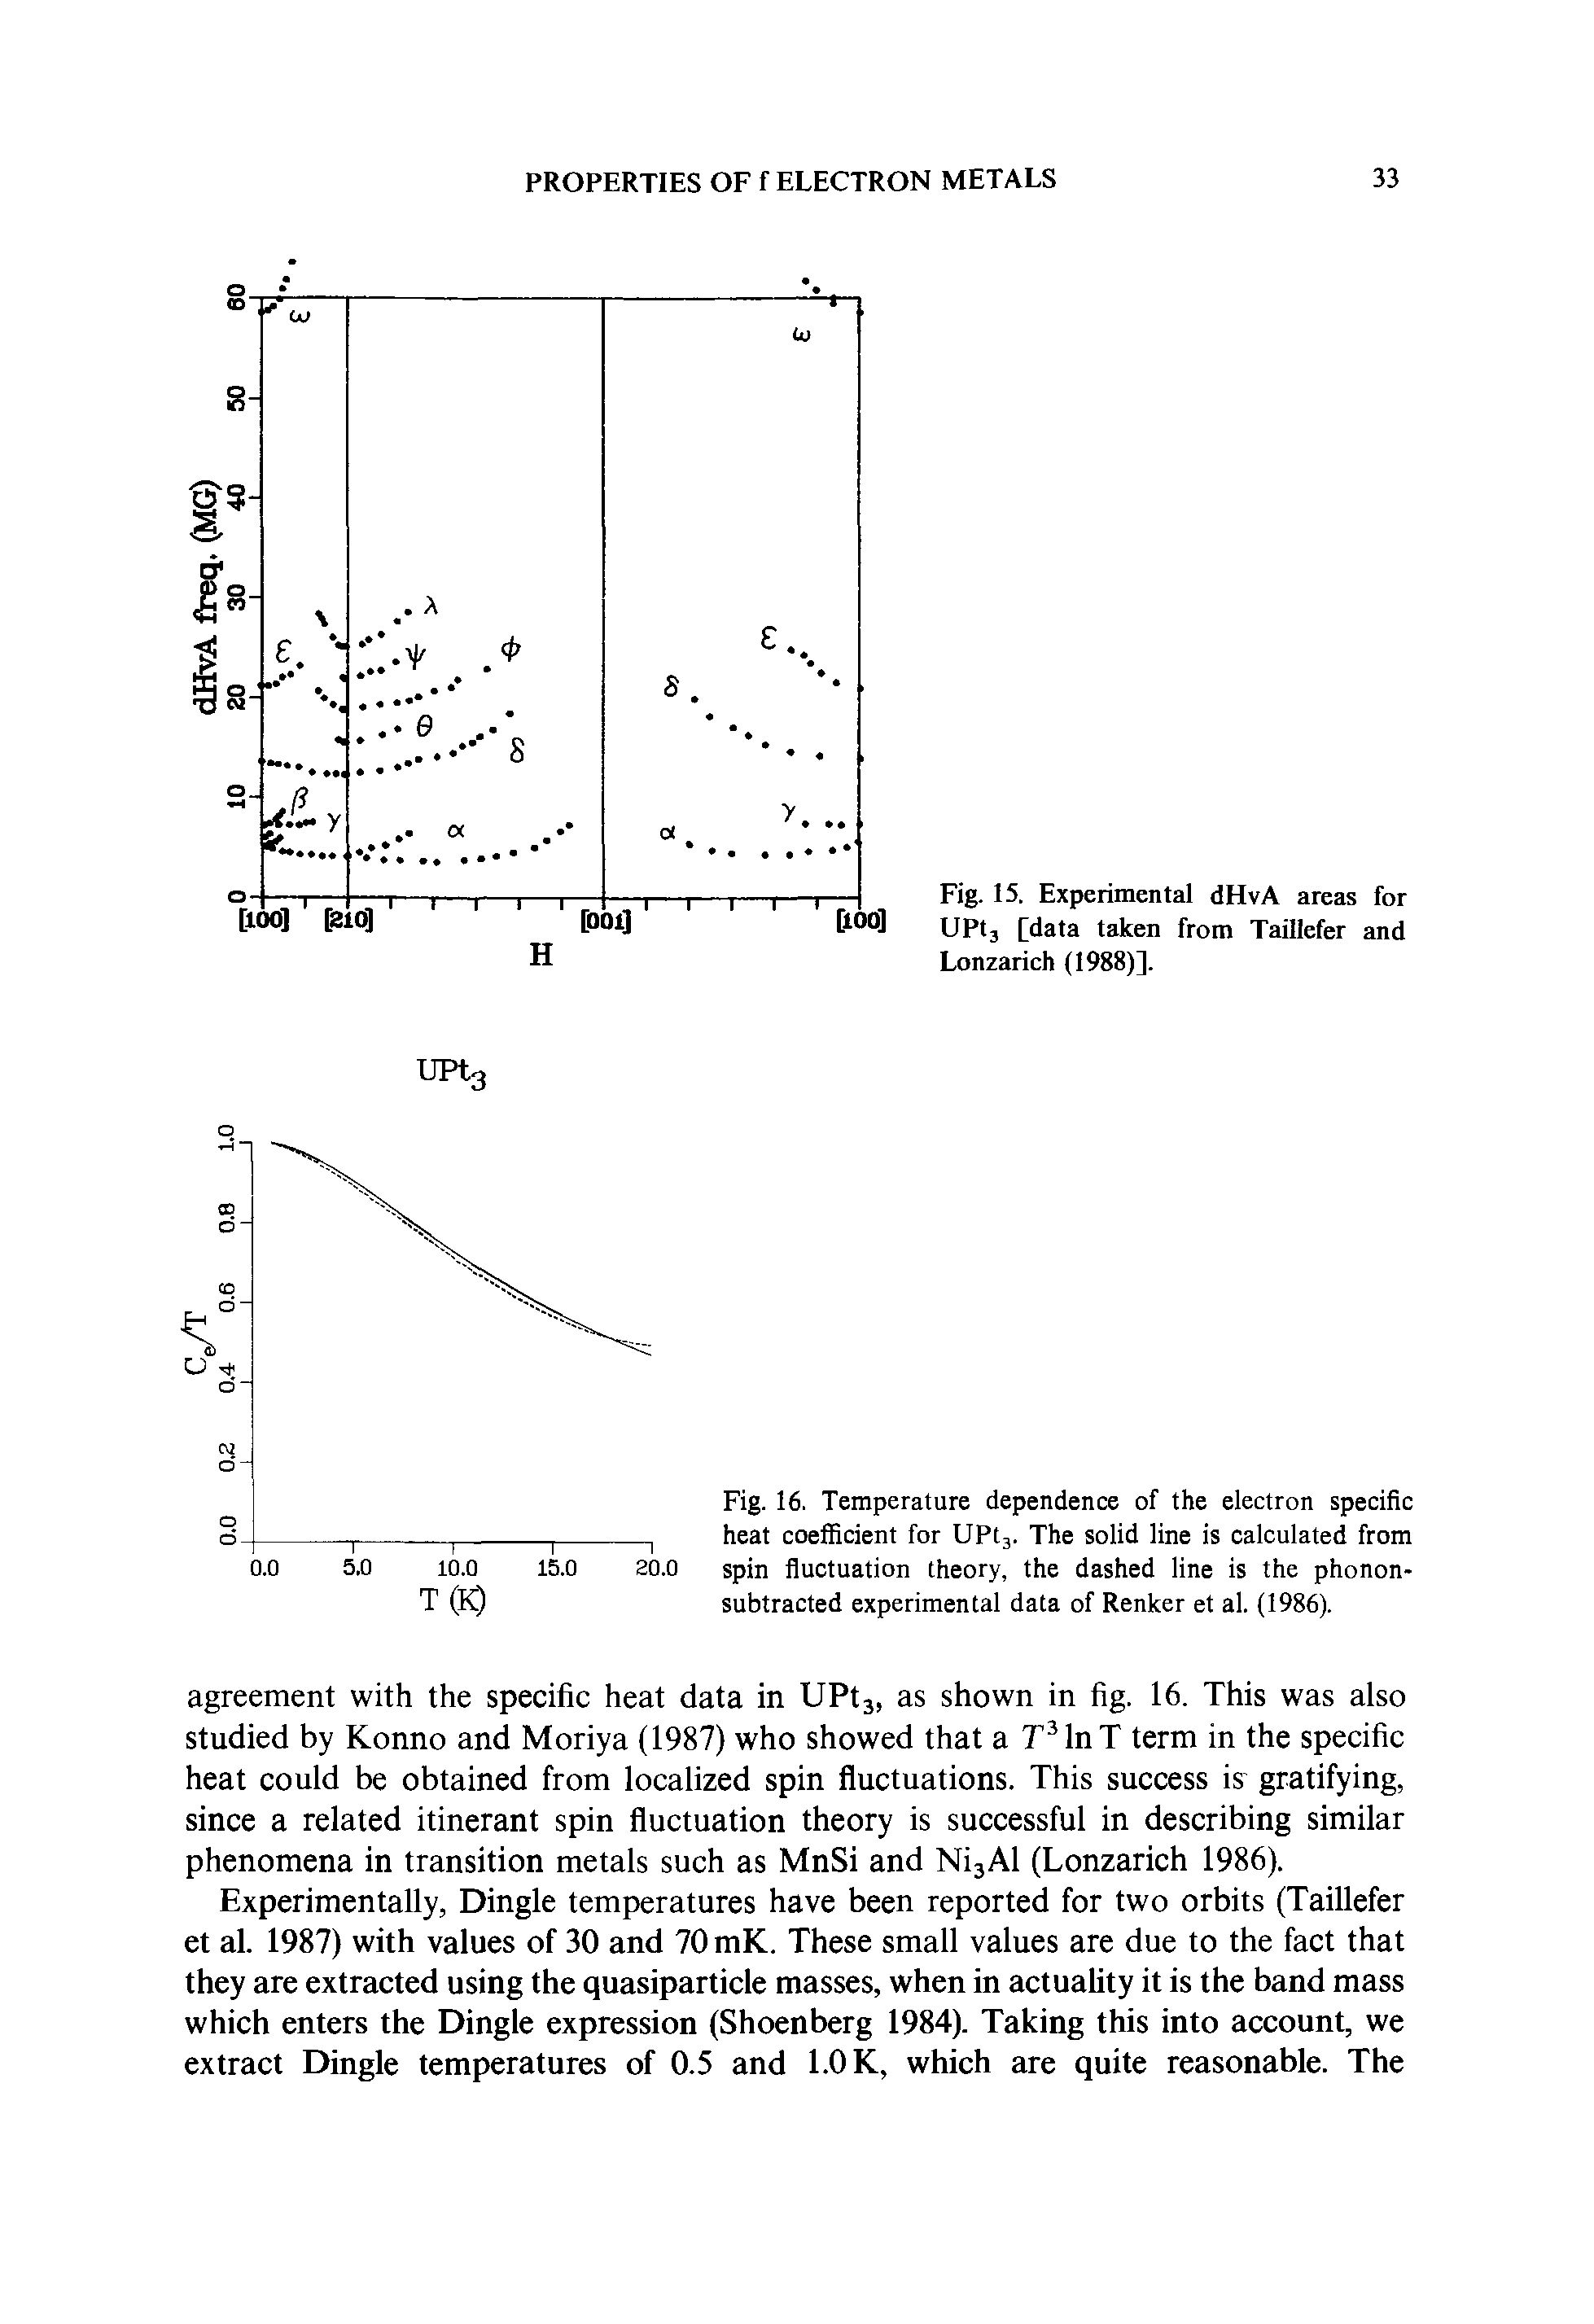 Fig. 16. Temperature dependence of the electron specific heat coefficient for UPtj. The solid line is calculated from spin fluctuation theory, the dashed line is the phonon-subtracted experimental data of Renker et al. (1986).